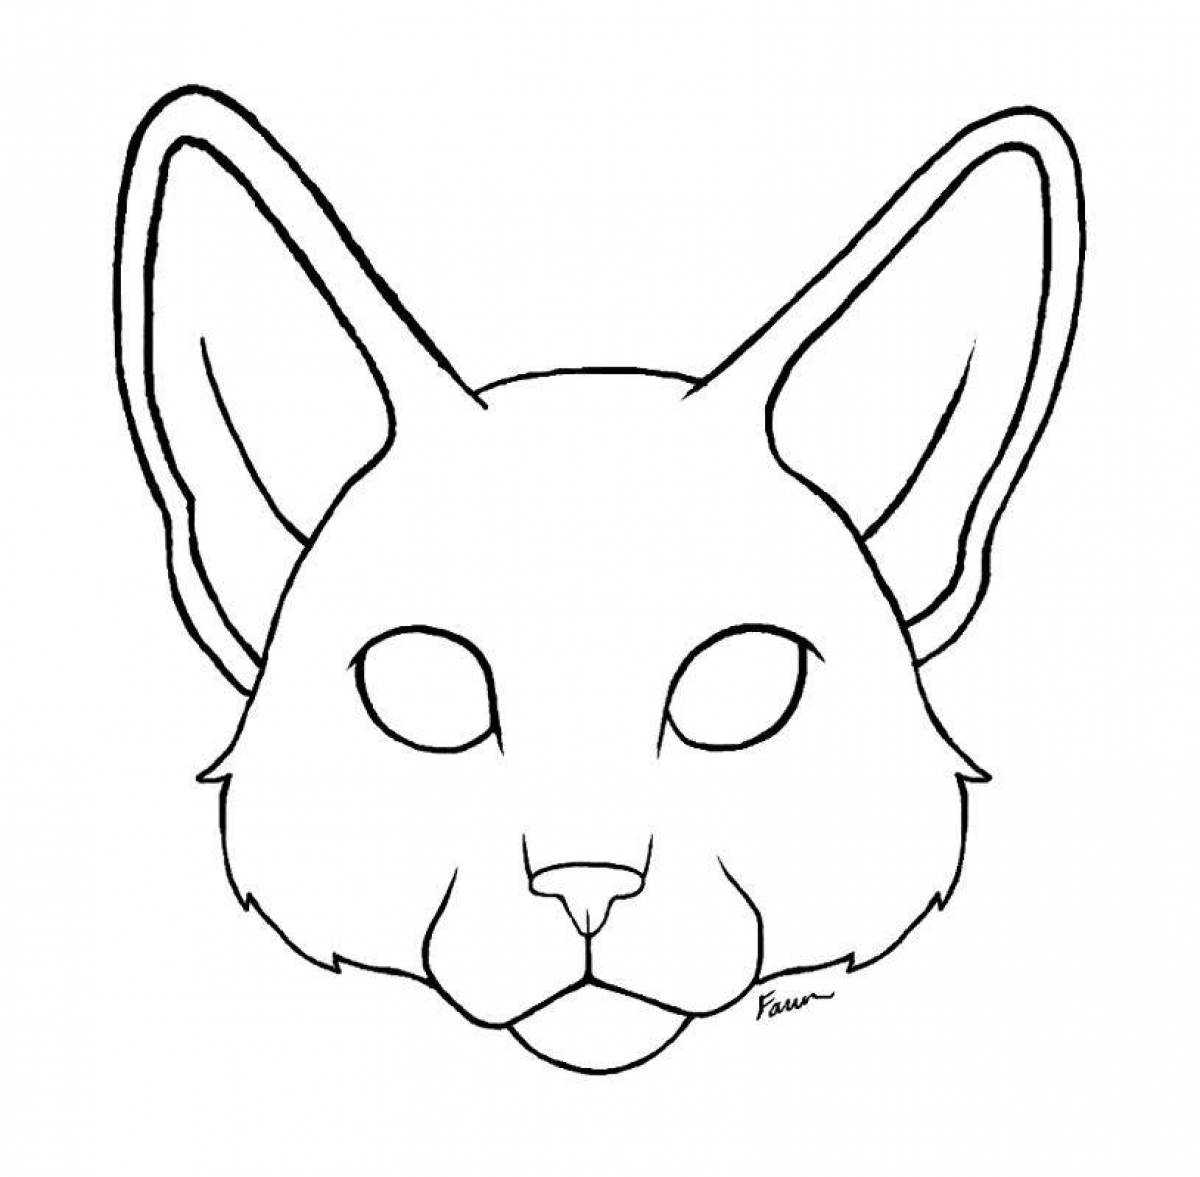 Coloring page witty cat face